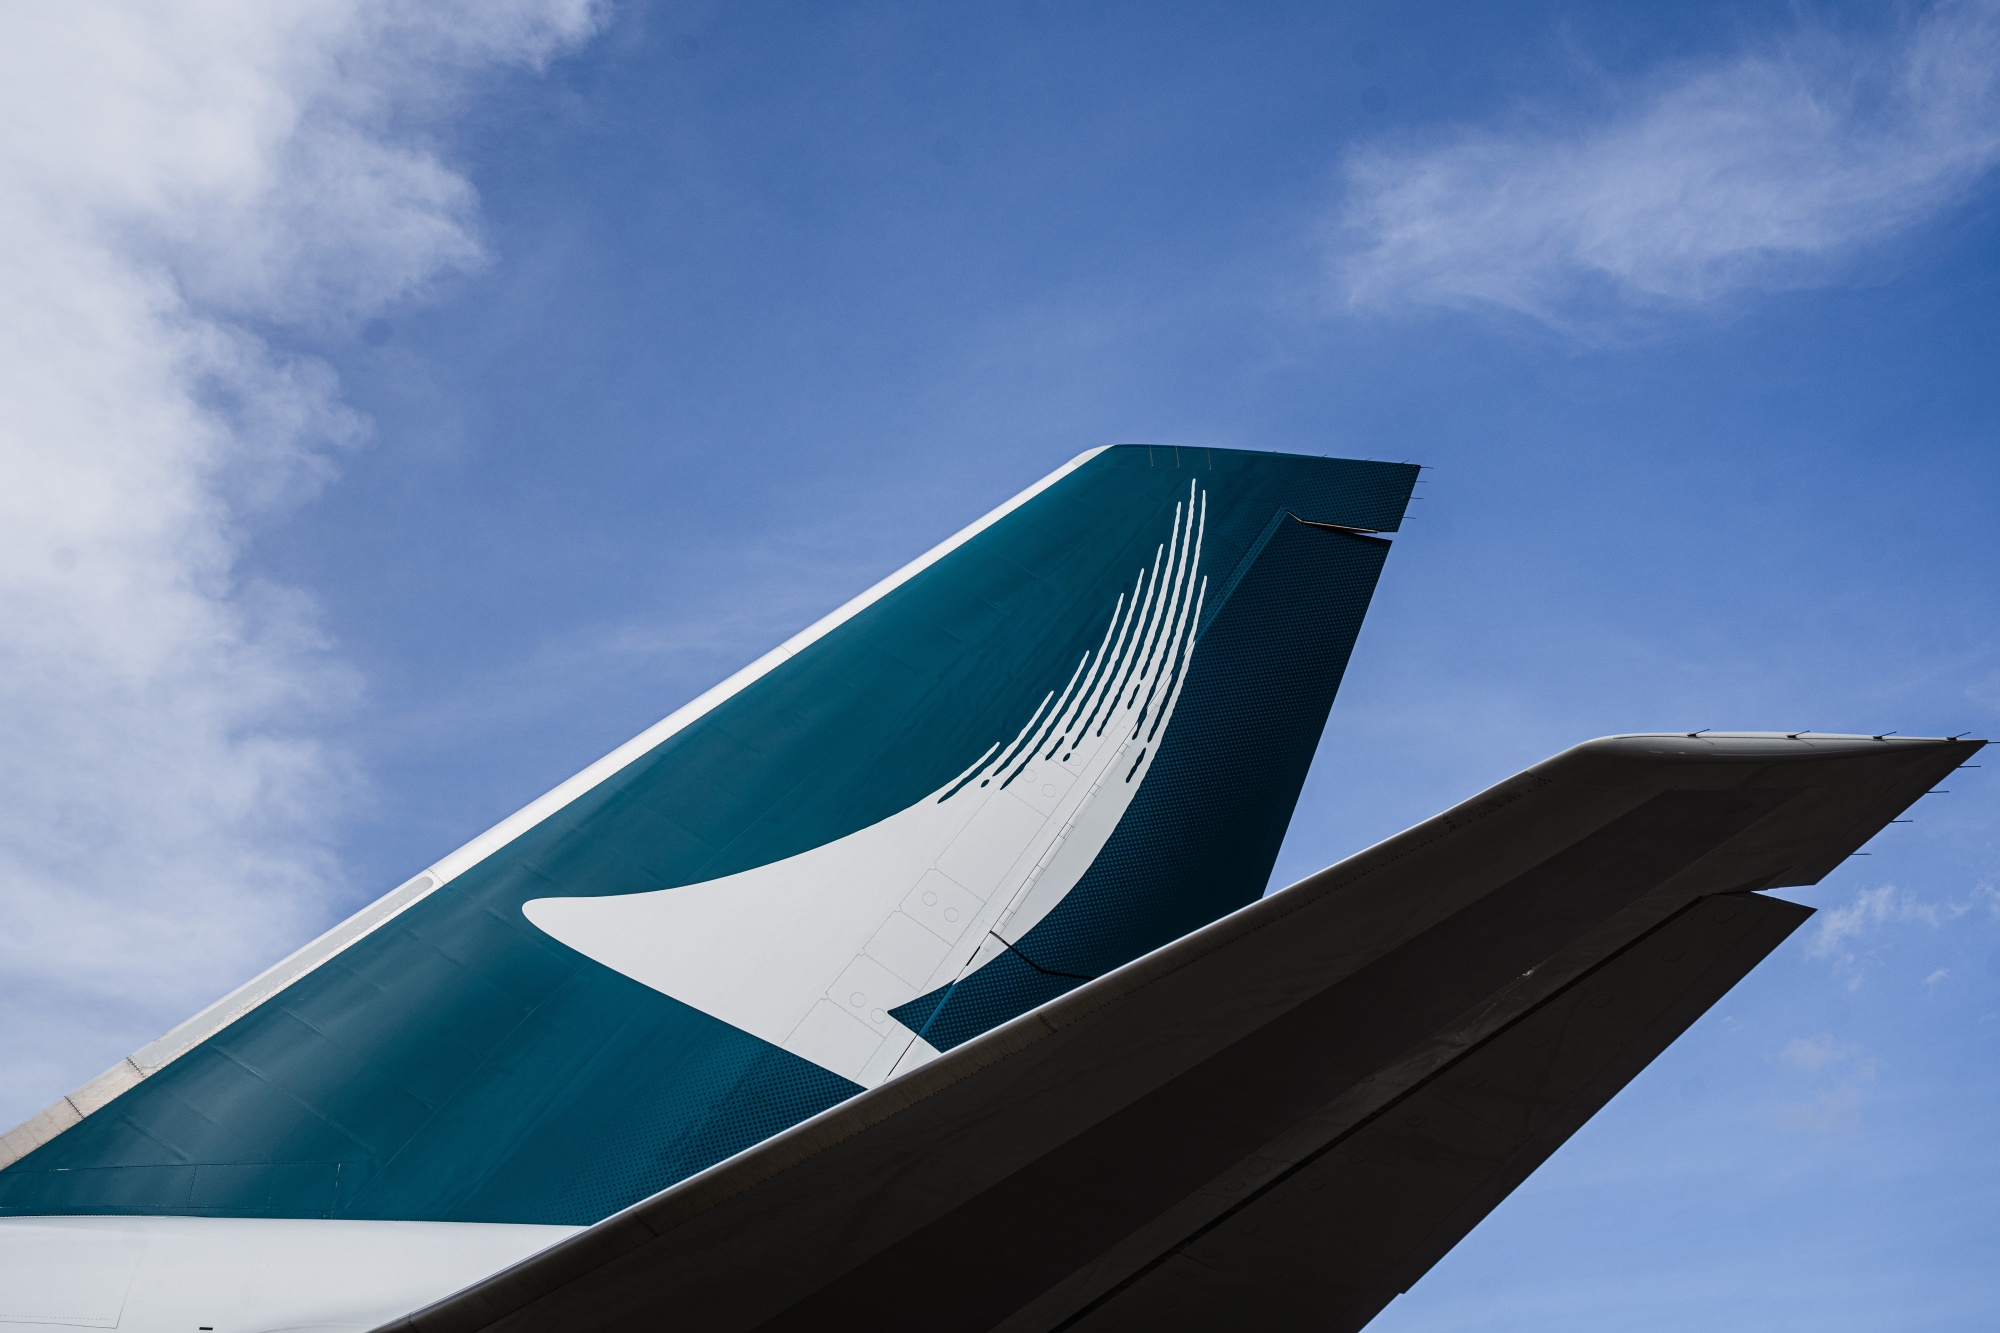 Cathay Cargo Launches Aircraft With New Livery